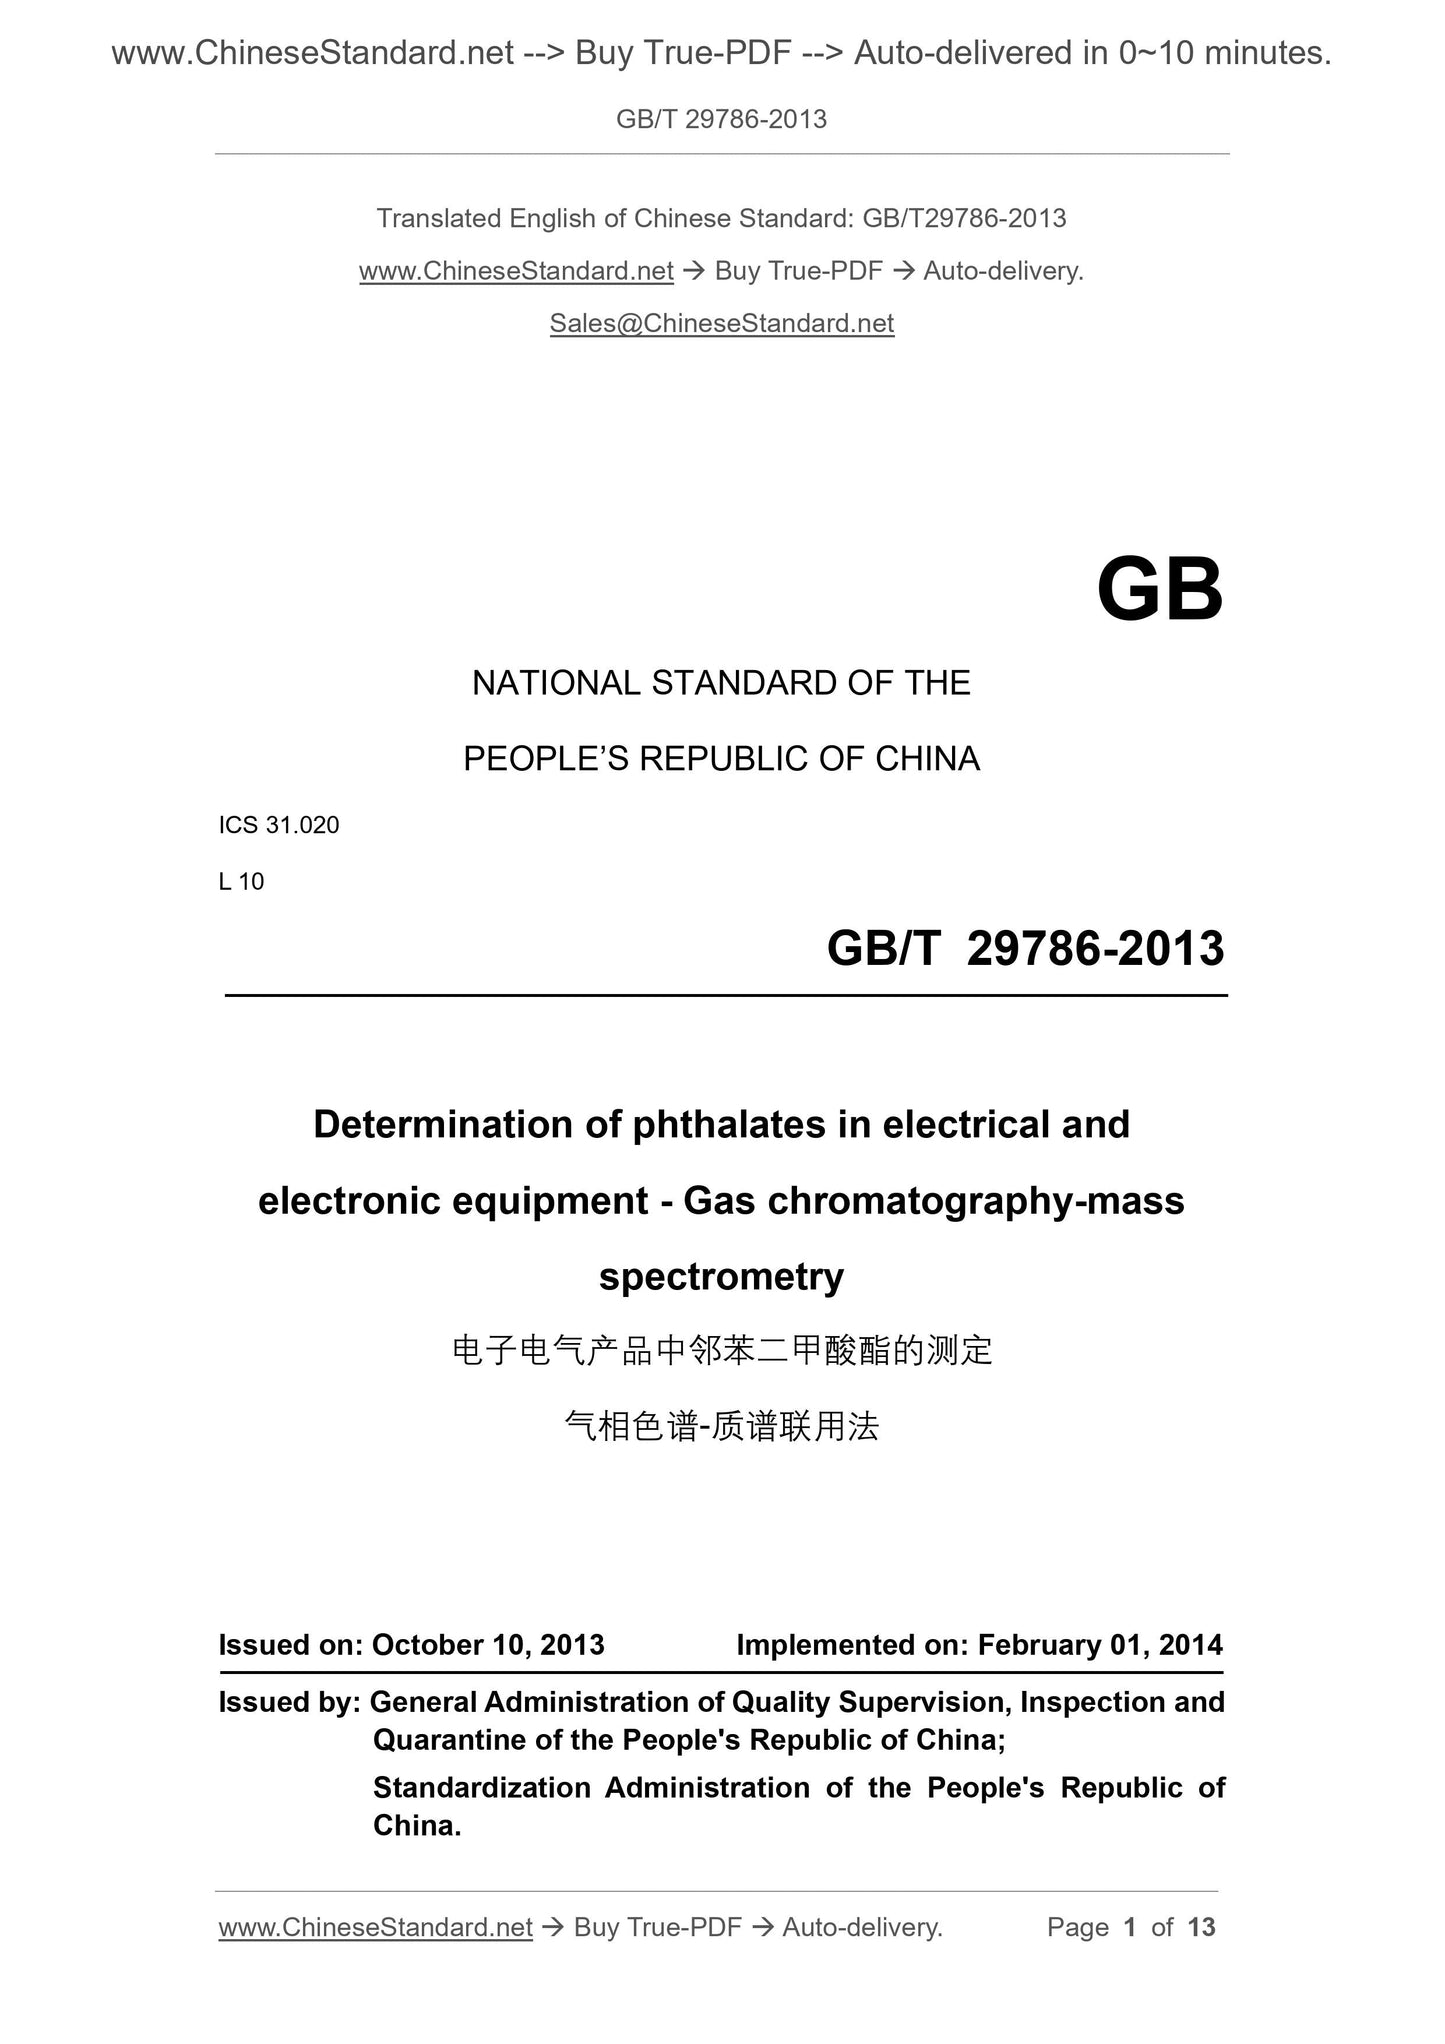 GB/T 29786-2013 Page 1